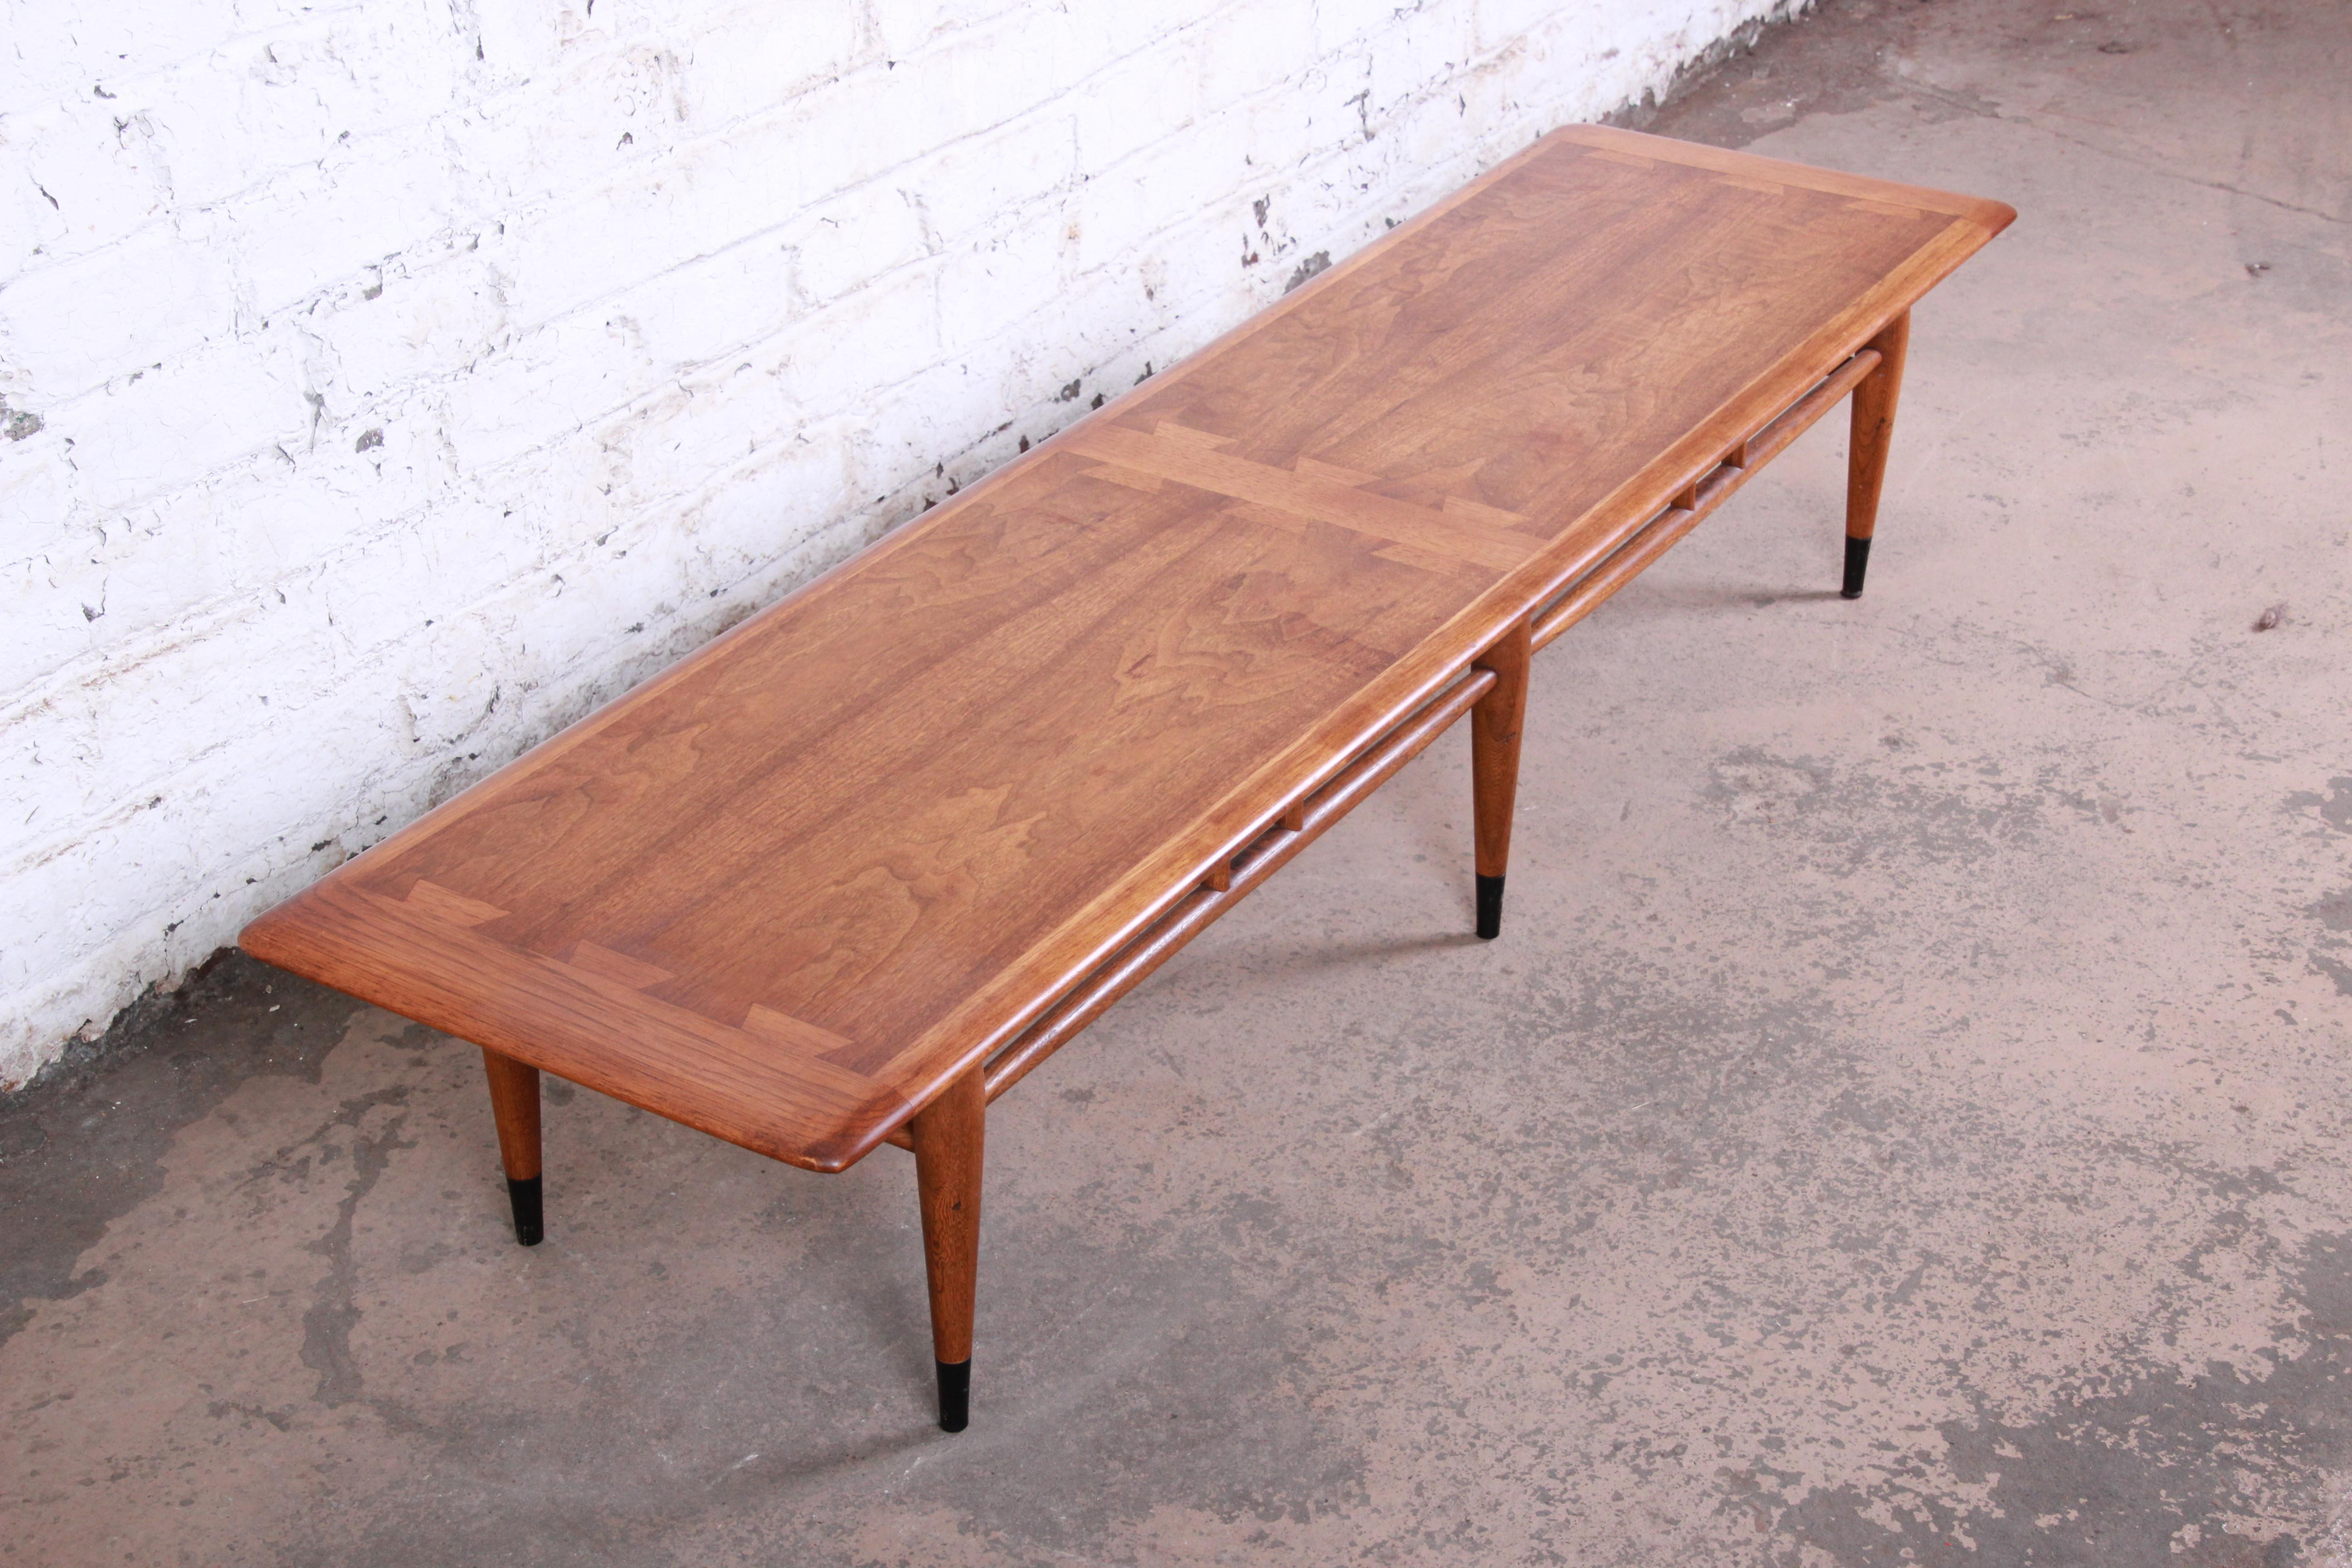 A gorgeous Mid-Century Modern long coffee table from the Acclaim line by Lane. The table features beautiful walnut and ashwood grain and a unique dovetail design. It sits on tapered legs with ebonized feet and sleek stretchers connecting the legs.